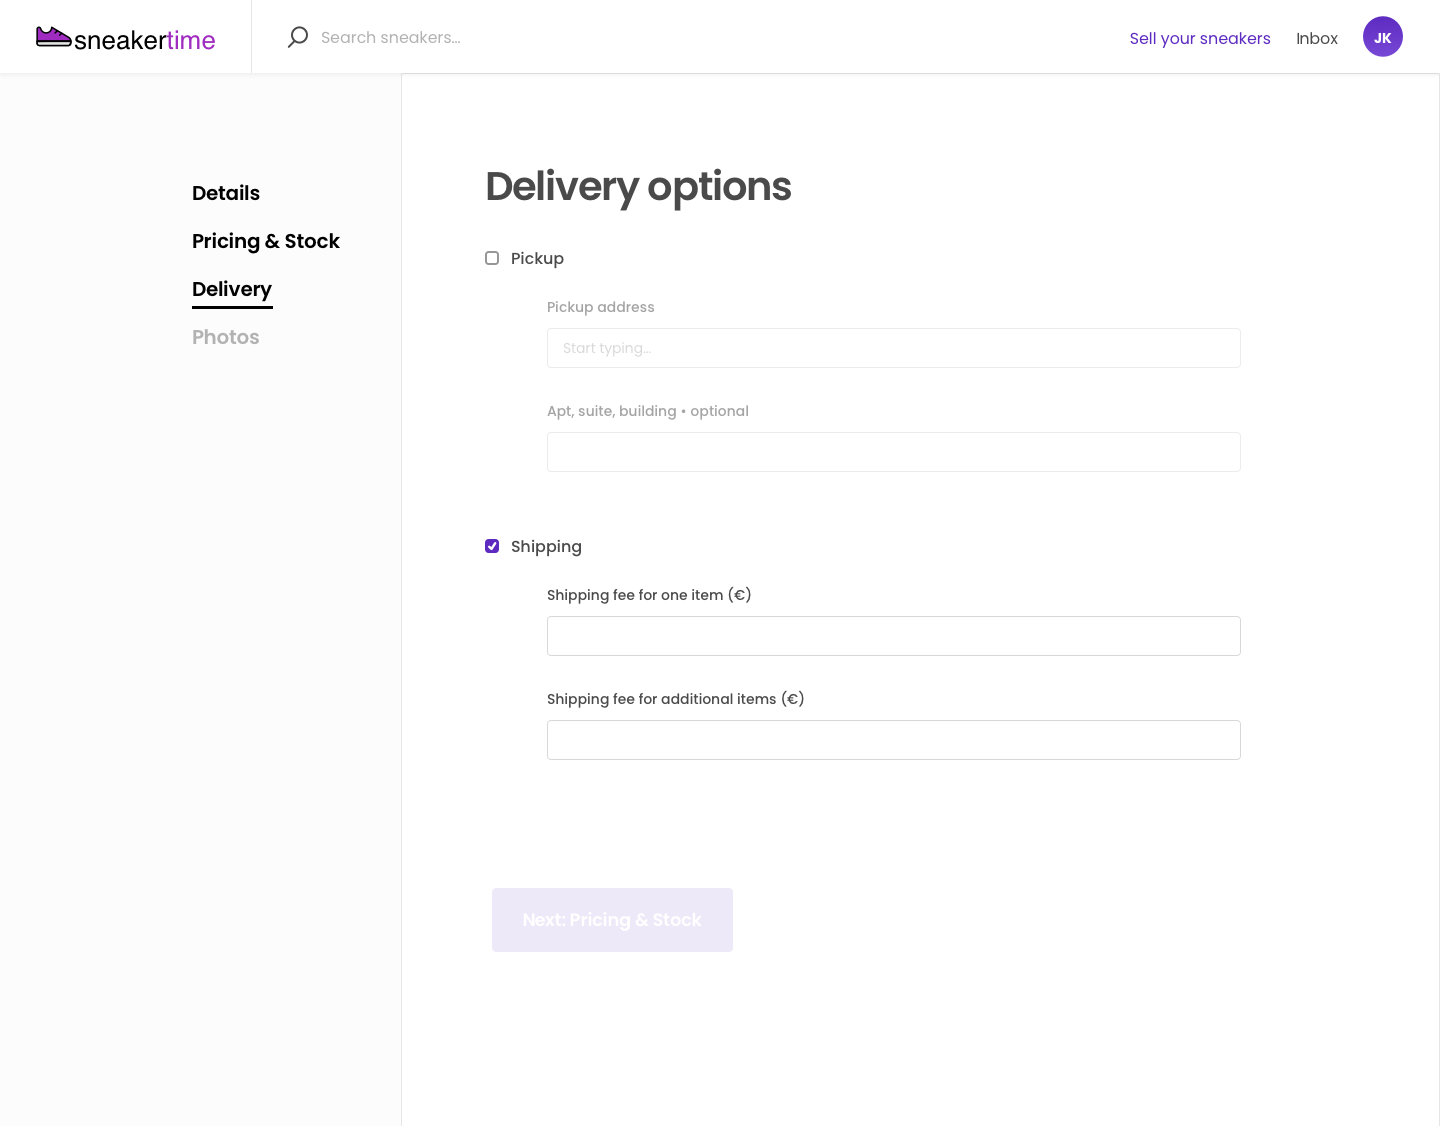 Sneakertime listing creation wizard - Delivery